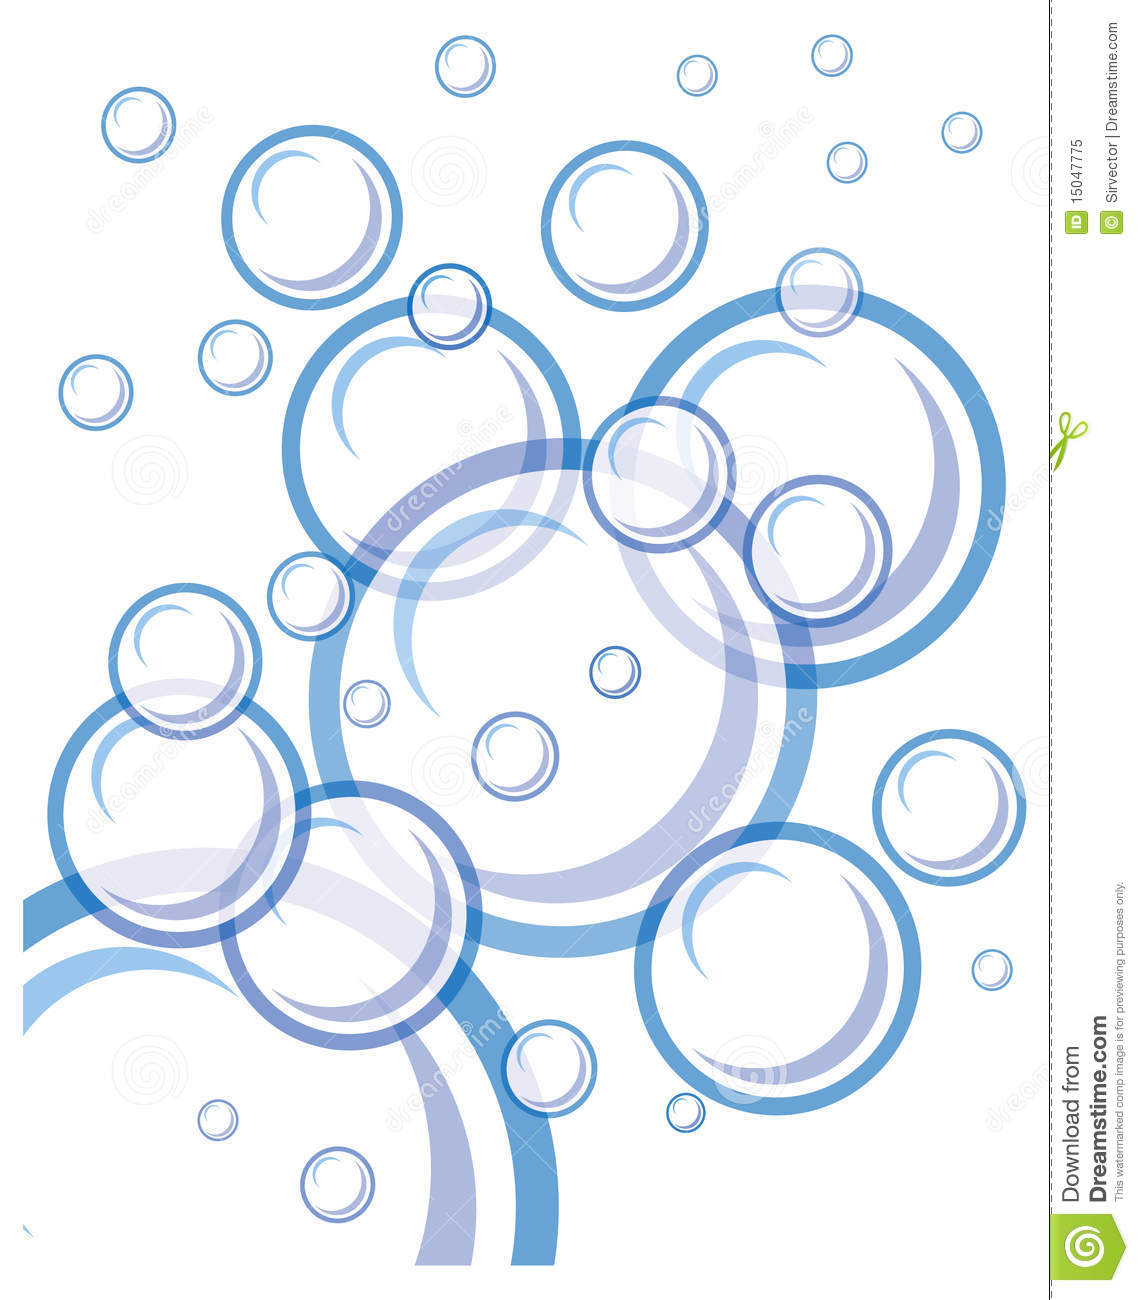 Bubbles Floating In White Background Royalty Free Stock Photo   Image